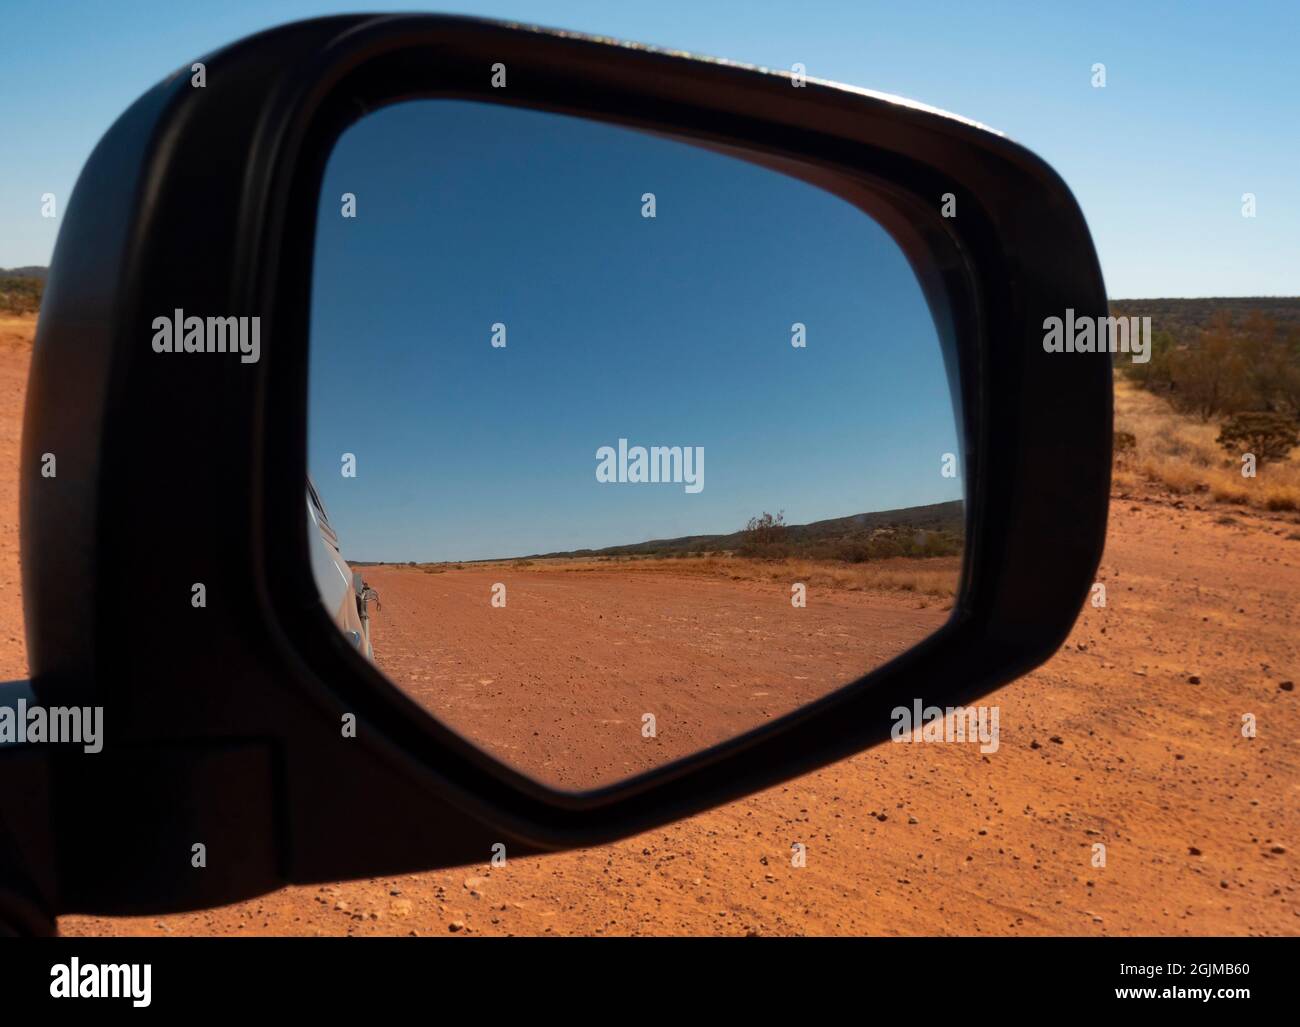 Outback central Australia red centre remote unsealed dirt gravel road track viewed from rear view mirror. Stock Photo